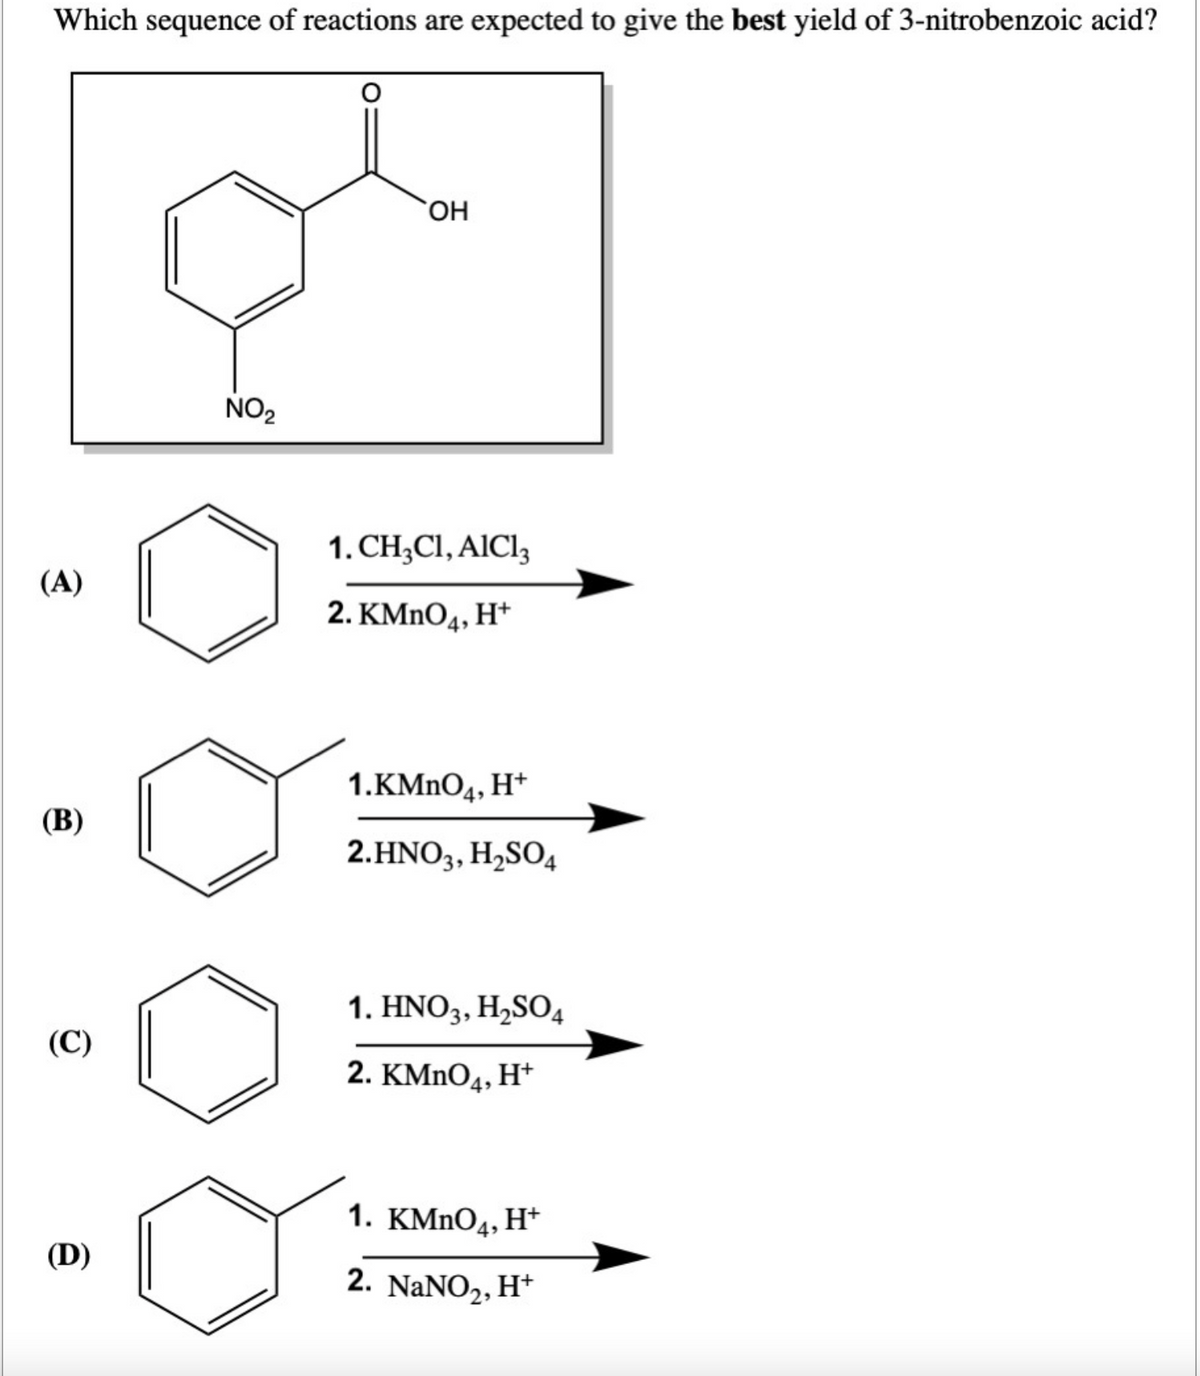 Which sequence of reactions are expected to give the best yield of 3-nitrobenzoic acid?
(A)
(B)
(C)
(D)
NO₂
OH
1. CH3C1, AlCl3
2. KMnO4, H+
1.KMnO4, H+
2.HNO3, H₂SO4
1. HNO3, H₂SO4
2. KMnO4, H+
1. KMnO4, H+
2. NaNO₂, H+